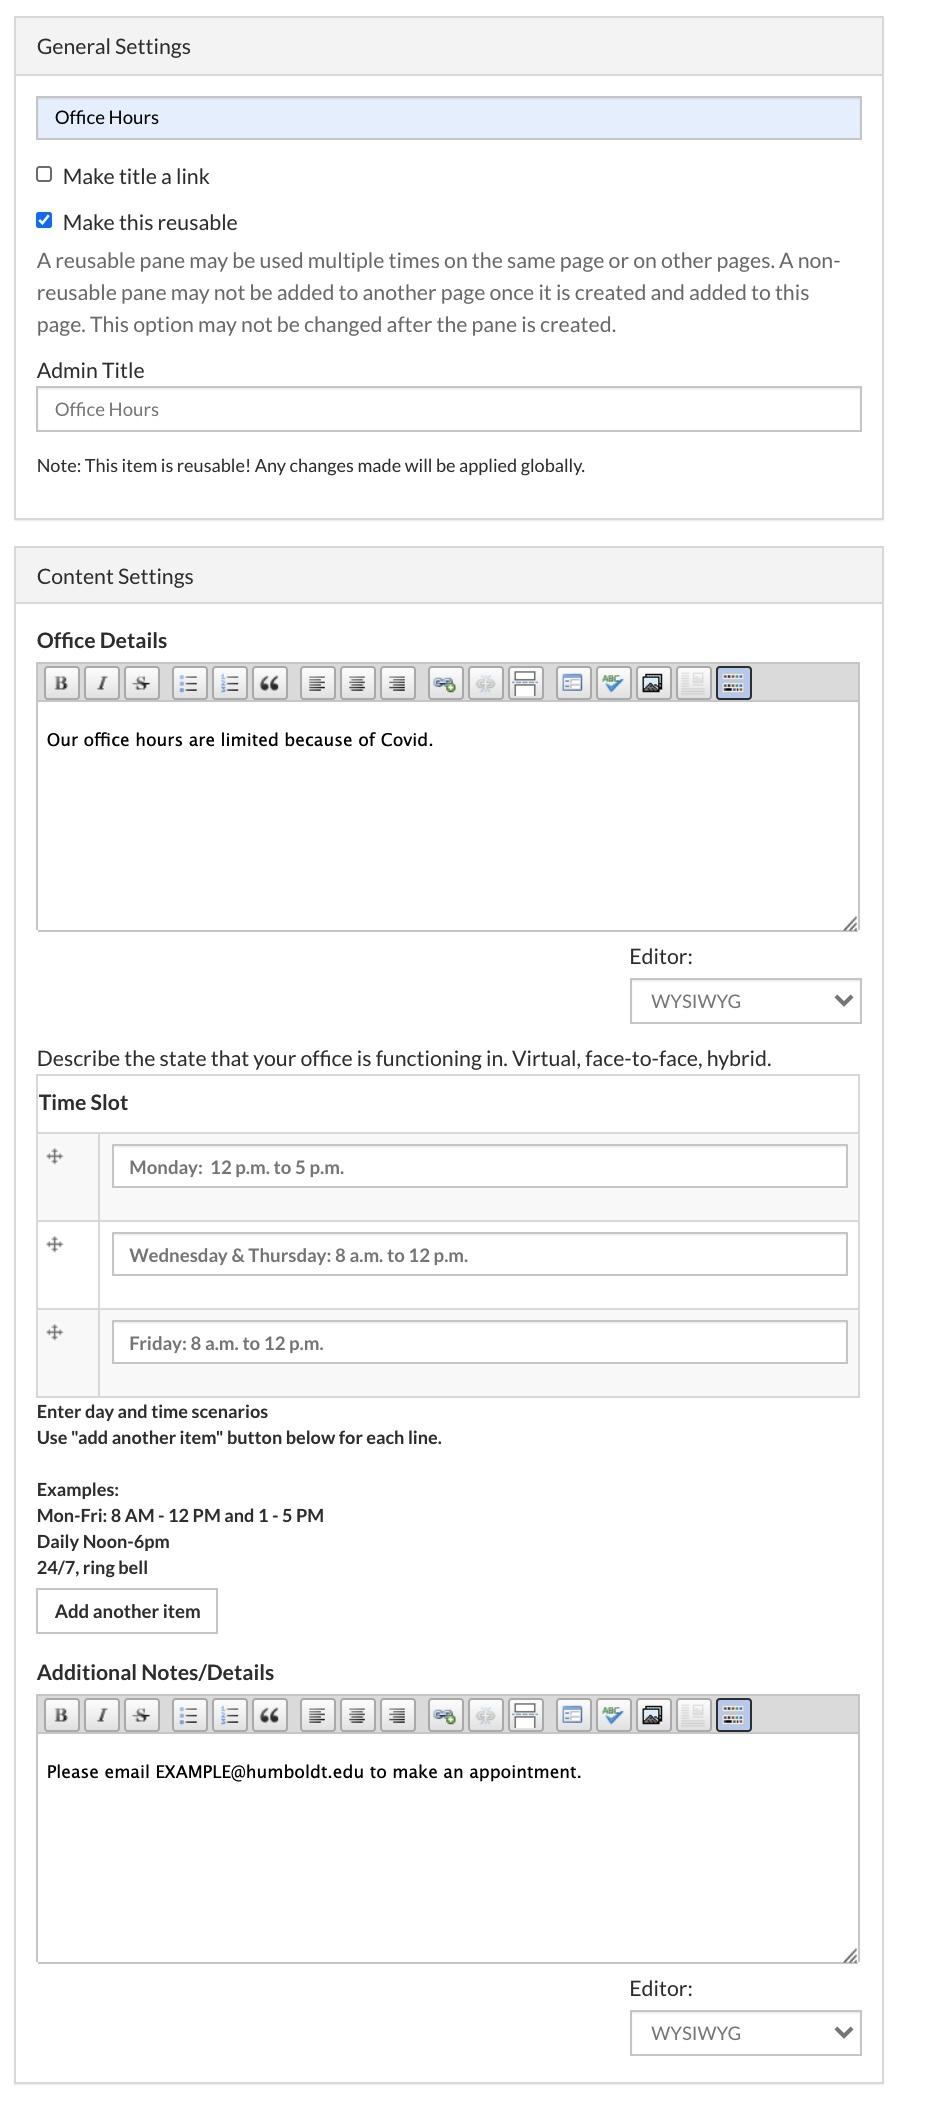 Office Hours example form